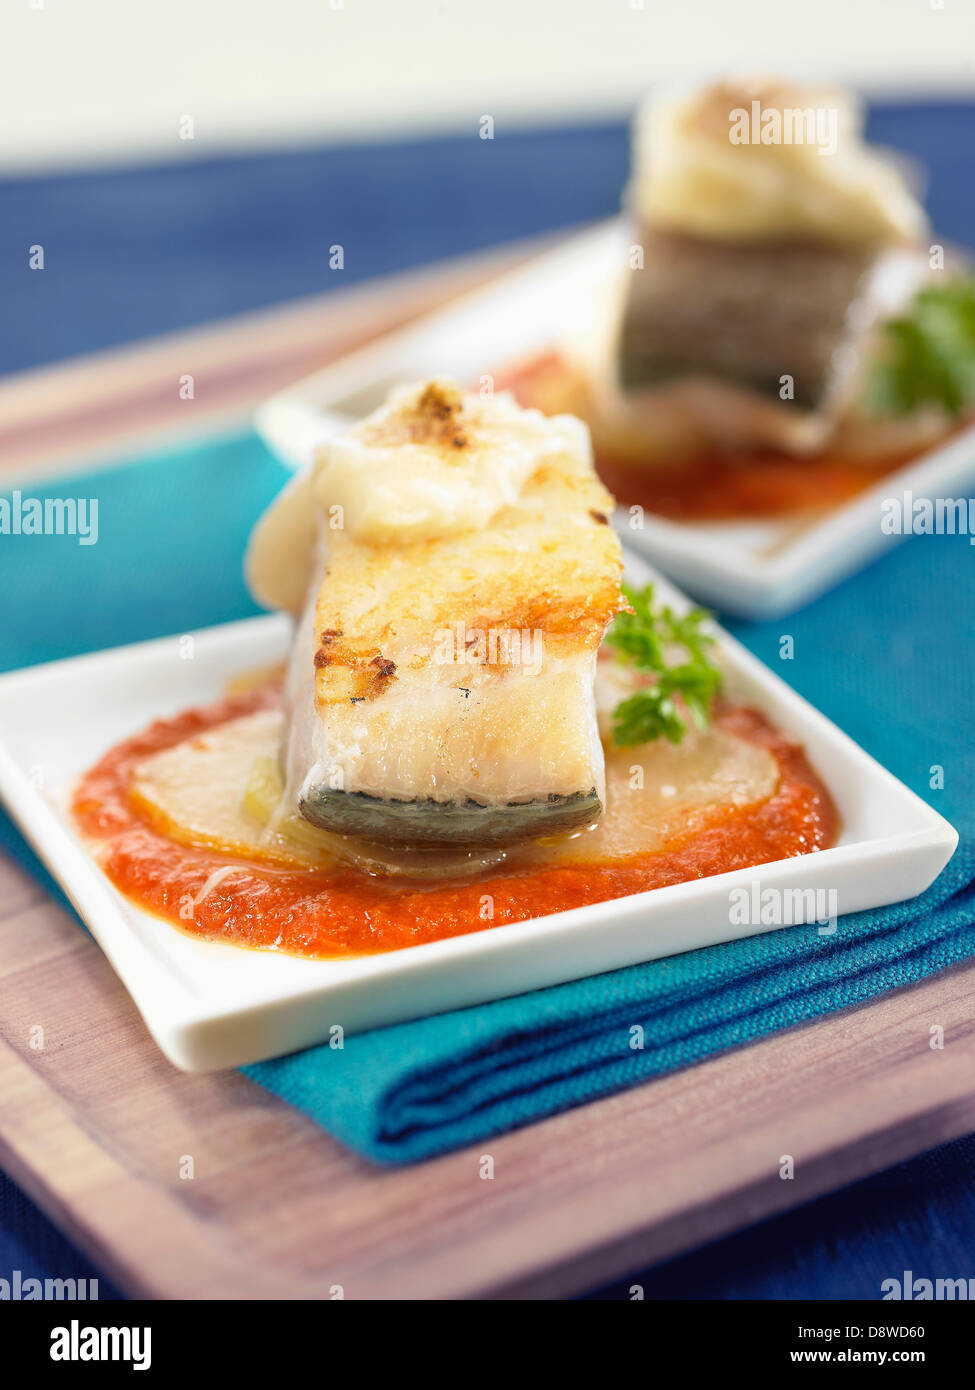 Salt-cod with onions,potatoes,melted cheese and tomato sauce Stock Photo